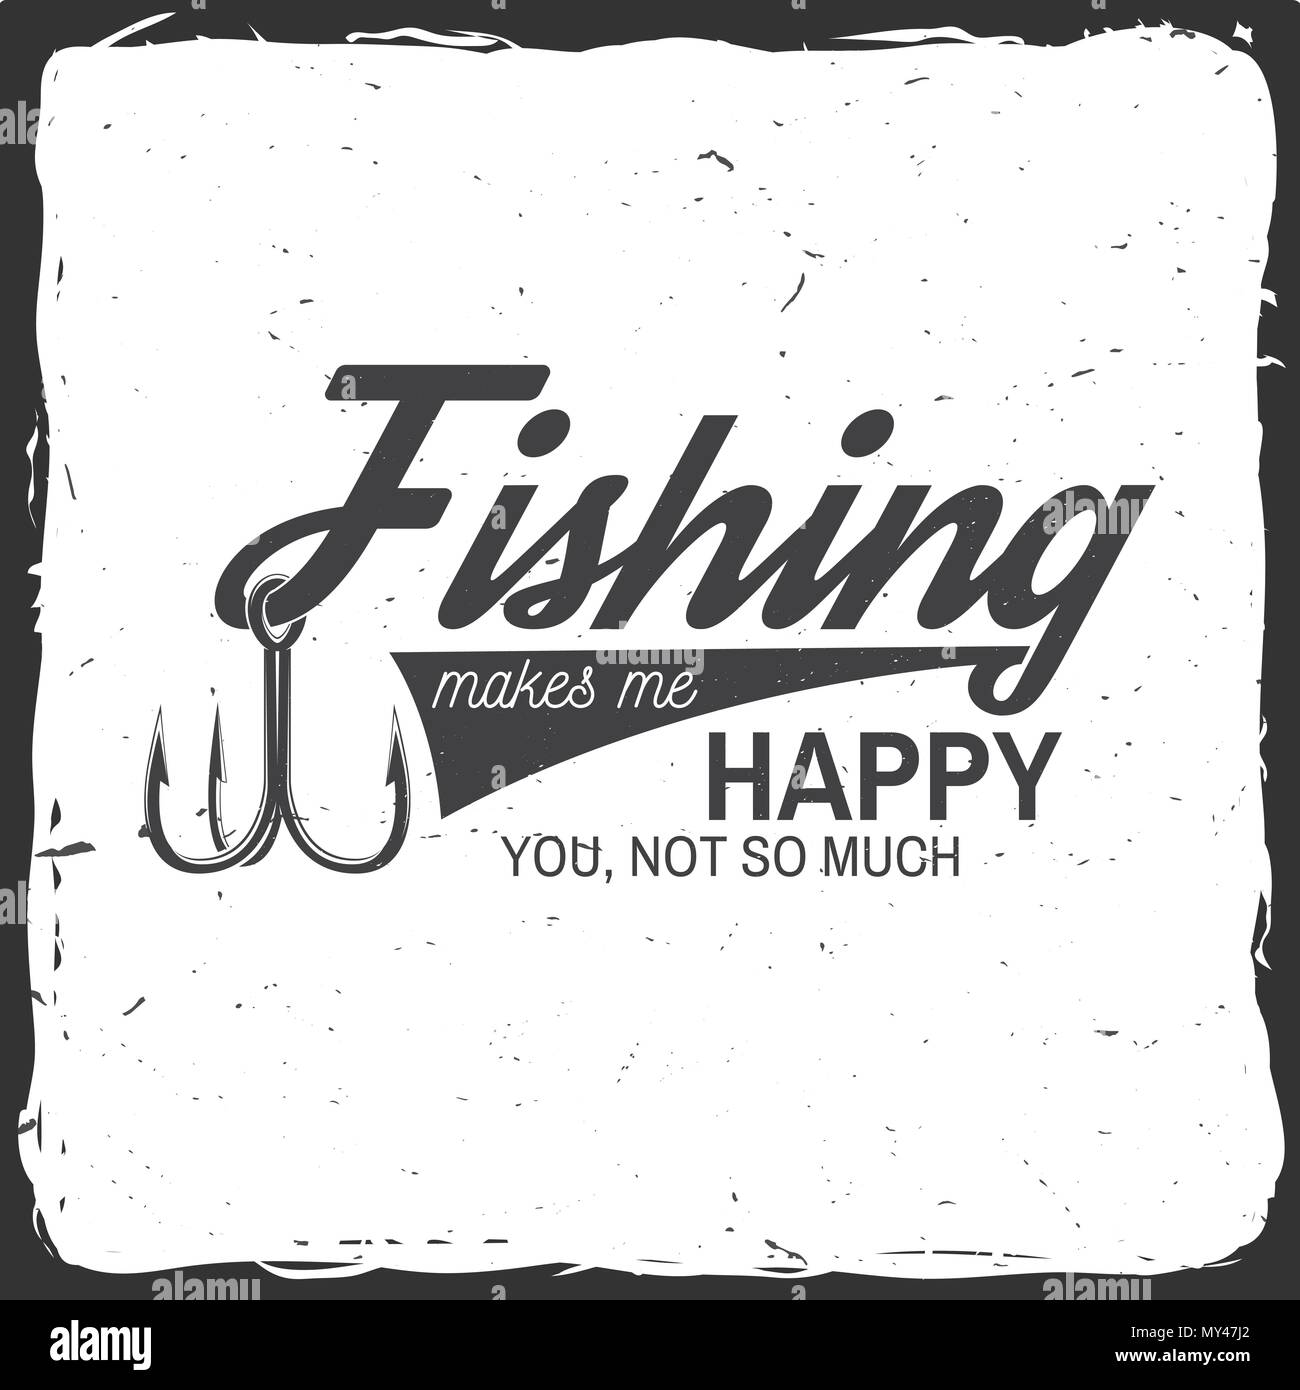 Fishing makes me happy you, not so much. Vector illustration